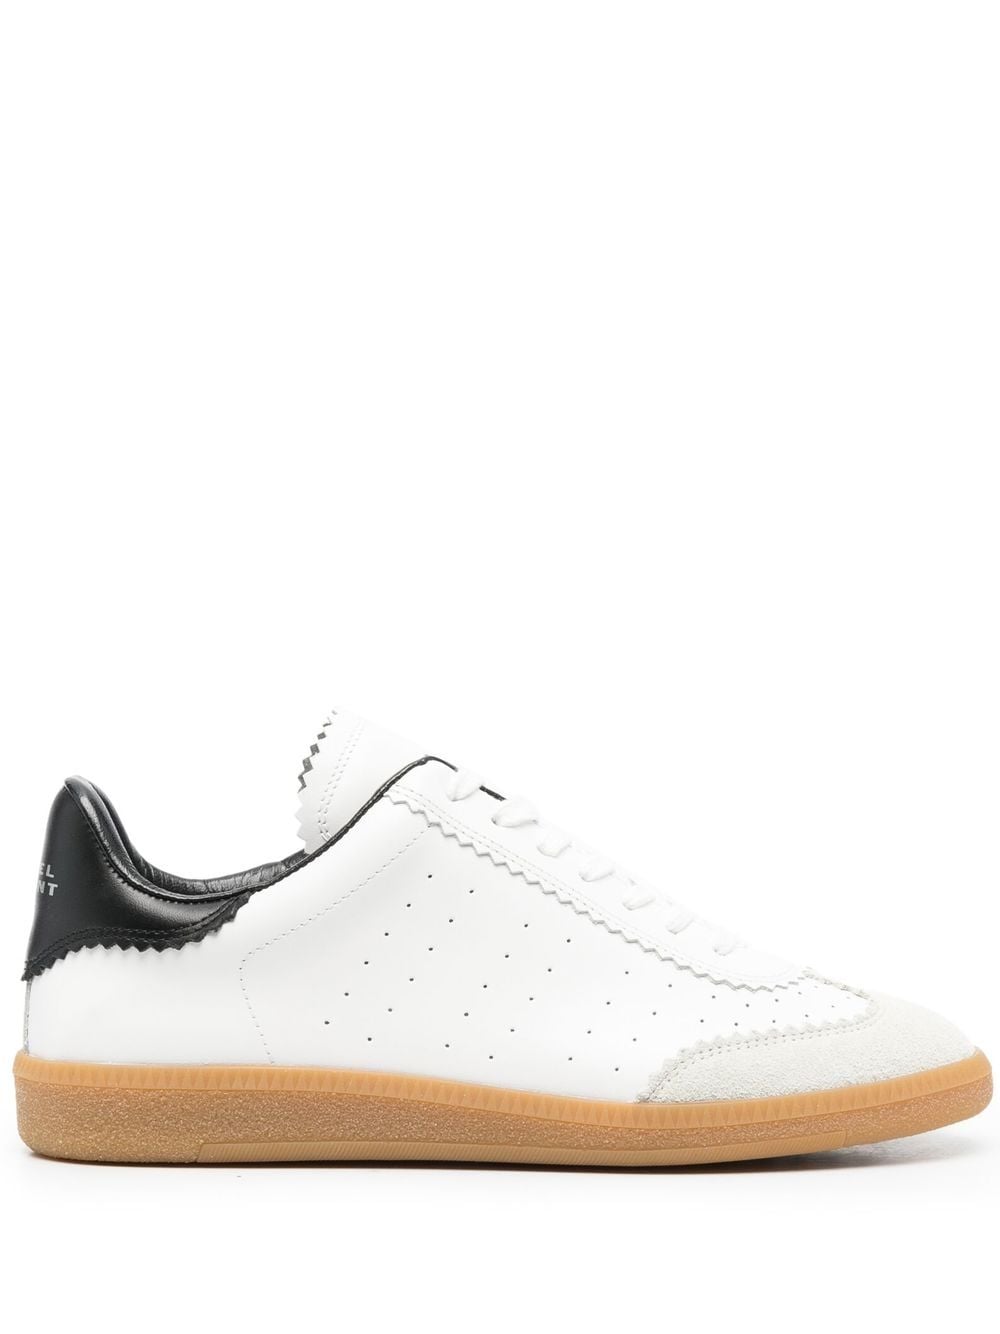 Image 1 of ISABEL MARANT low-top lace-up sneakers